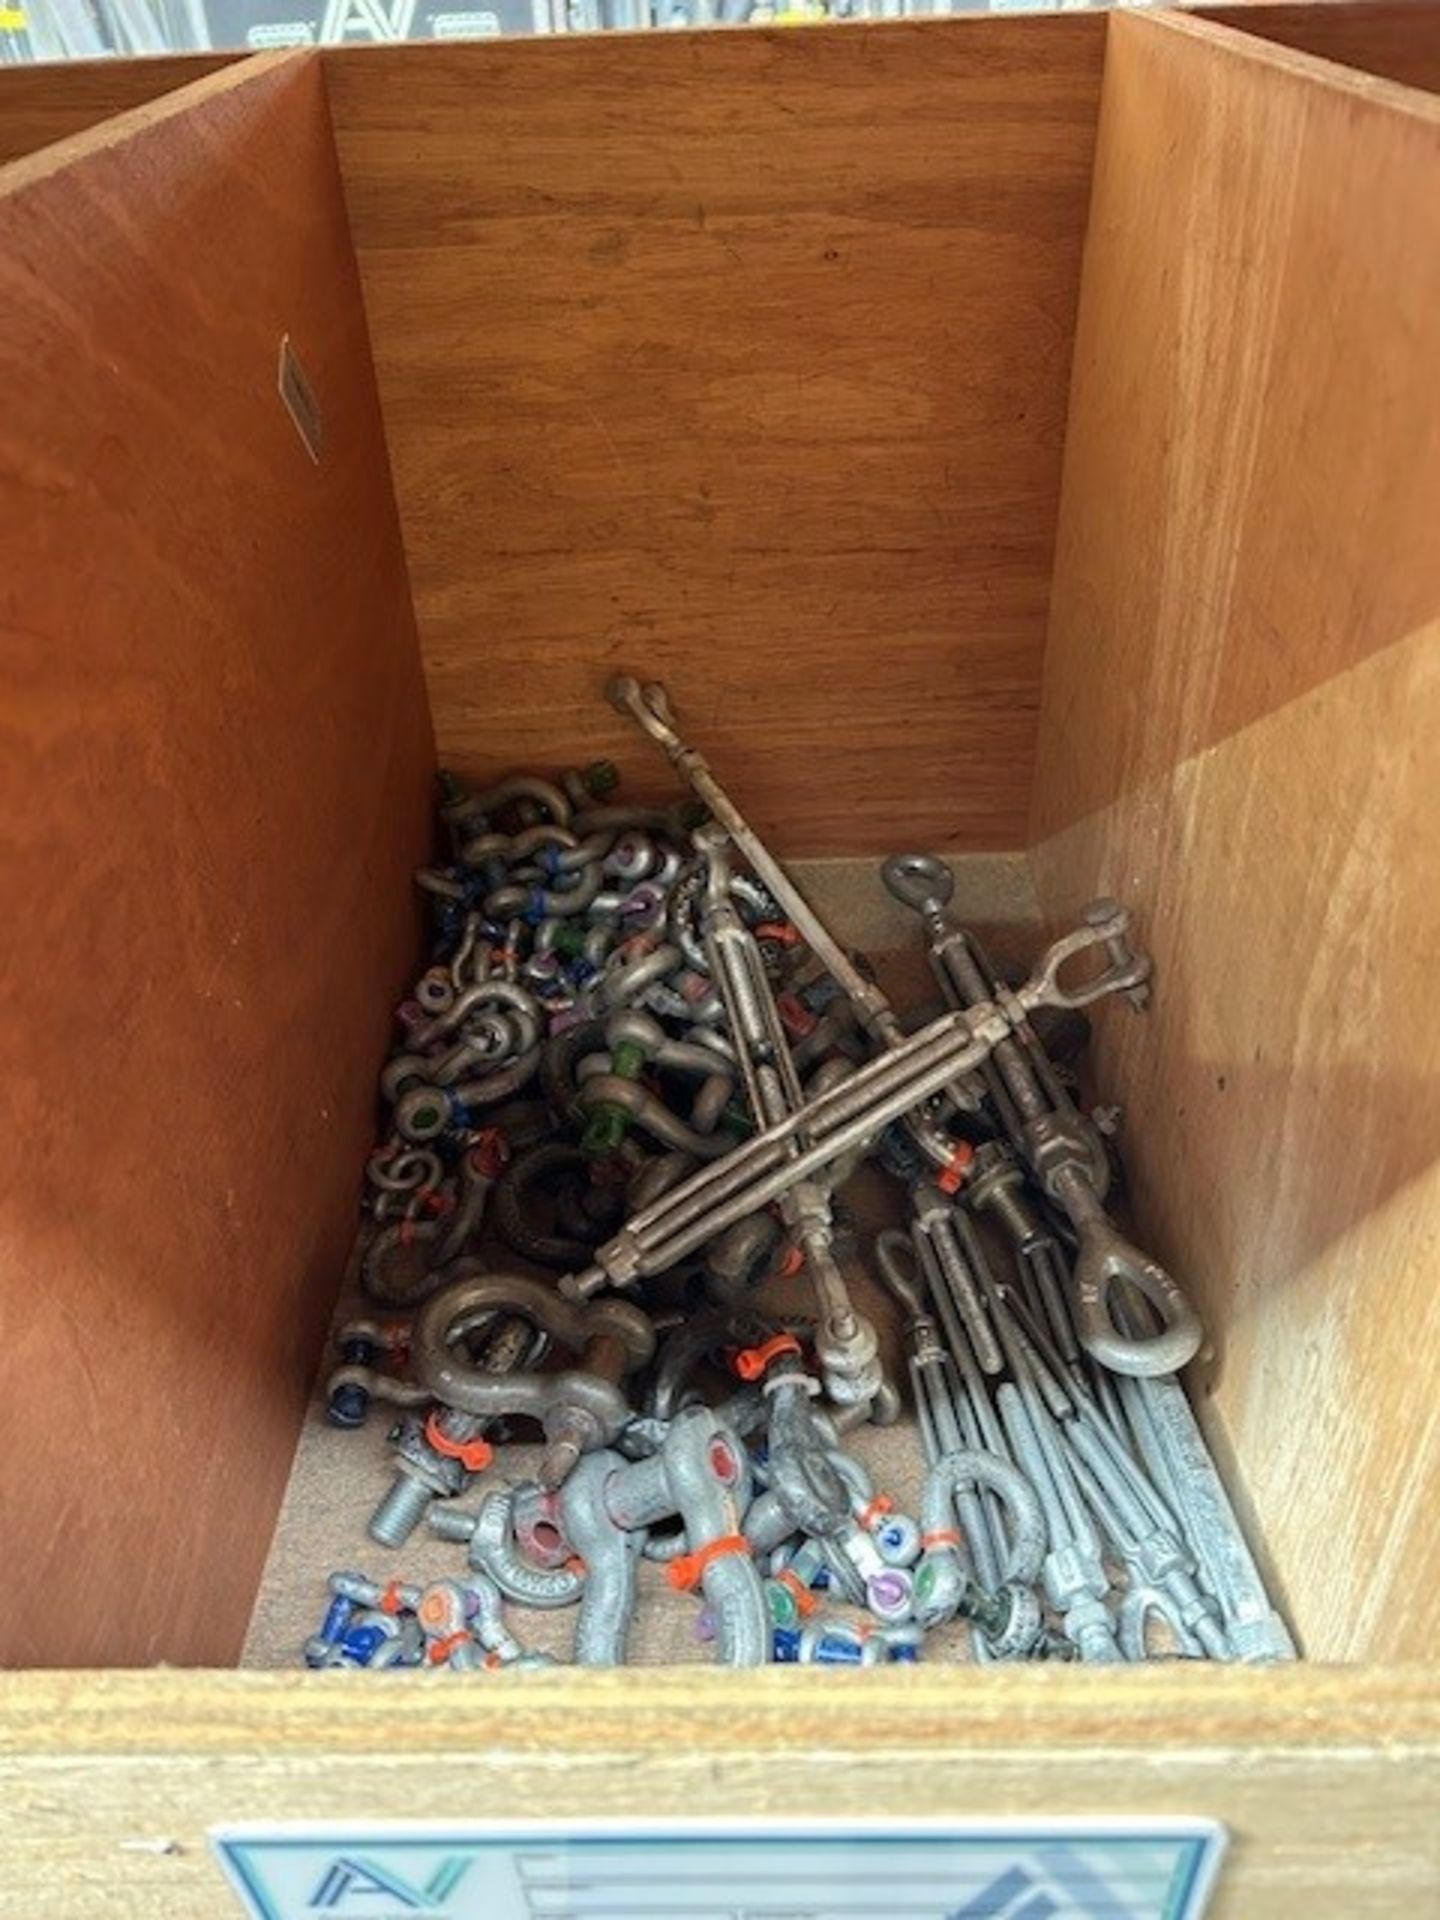 Contents Of Rigging Rack - Image 11 of 17